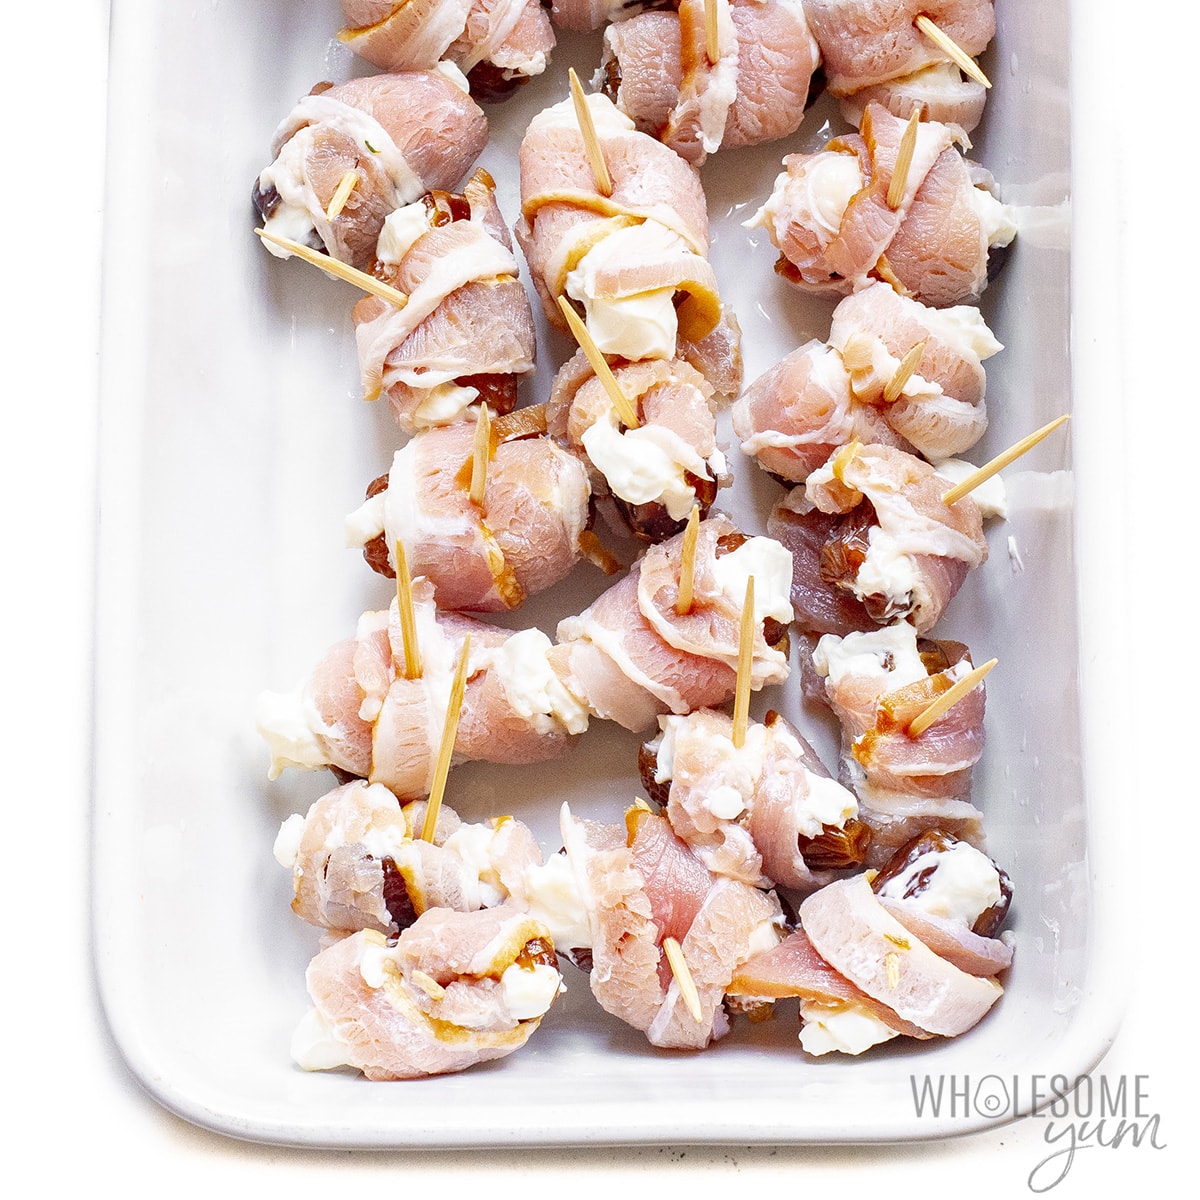 Dates wrapped in bacon in a baking dish.